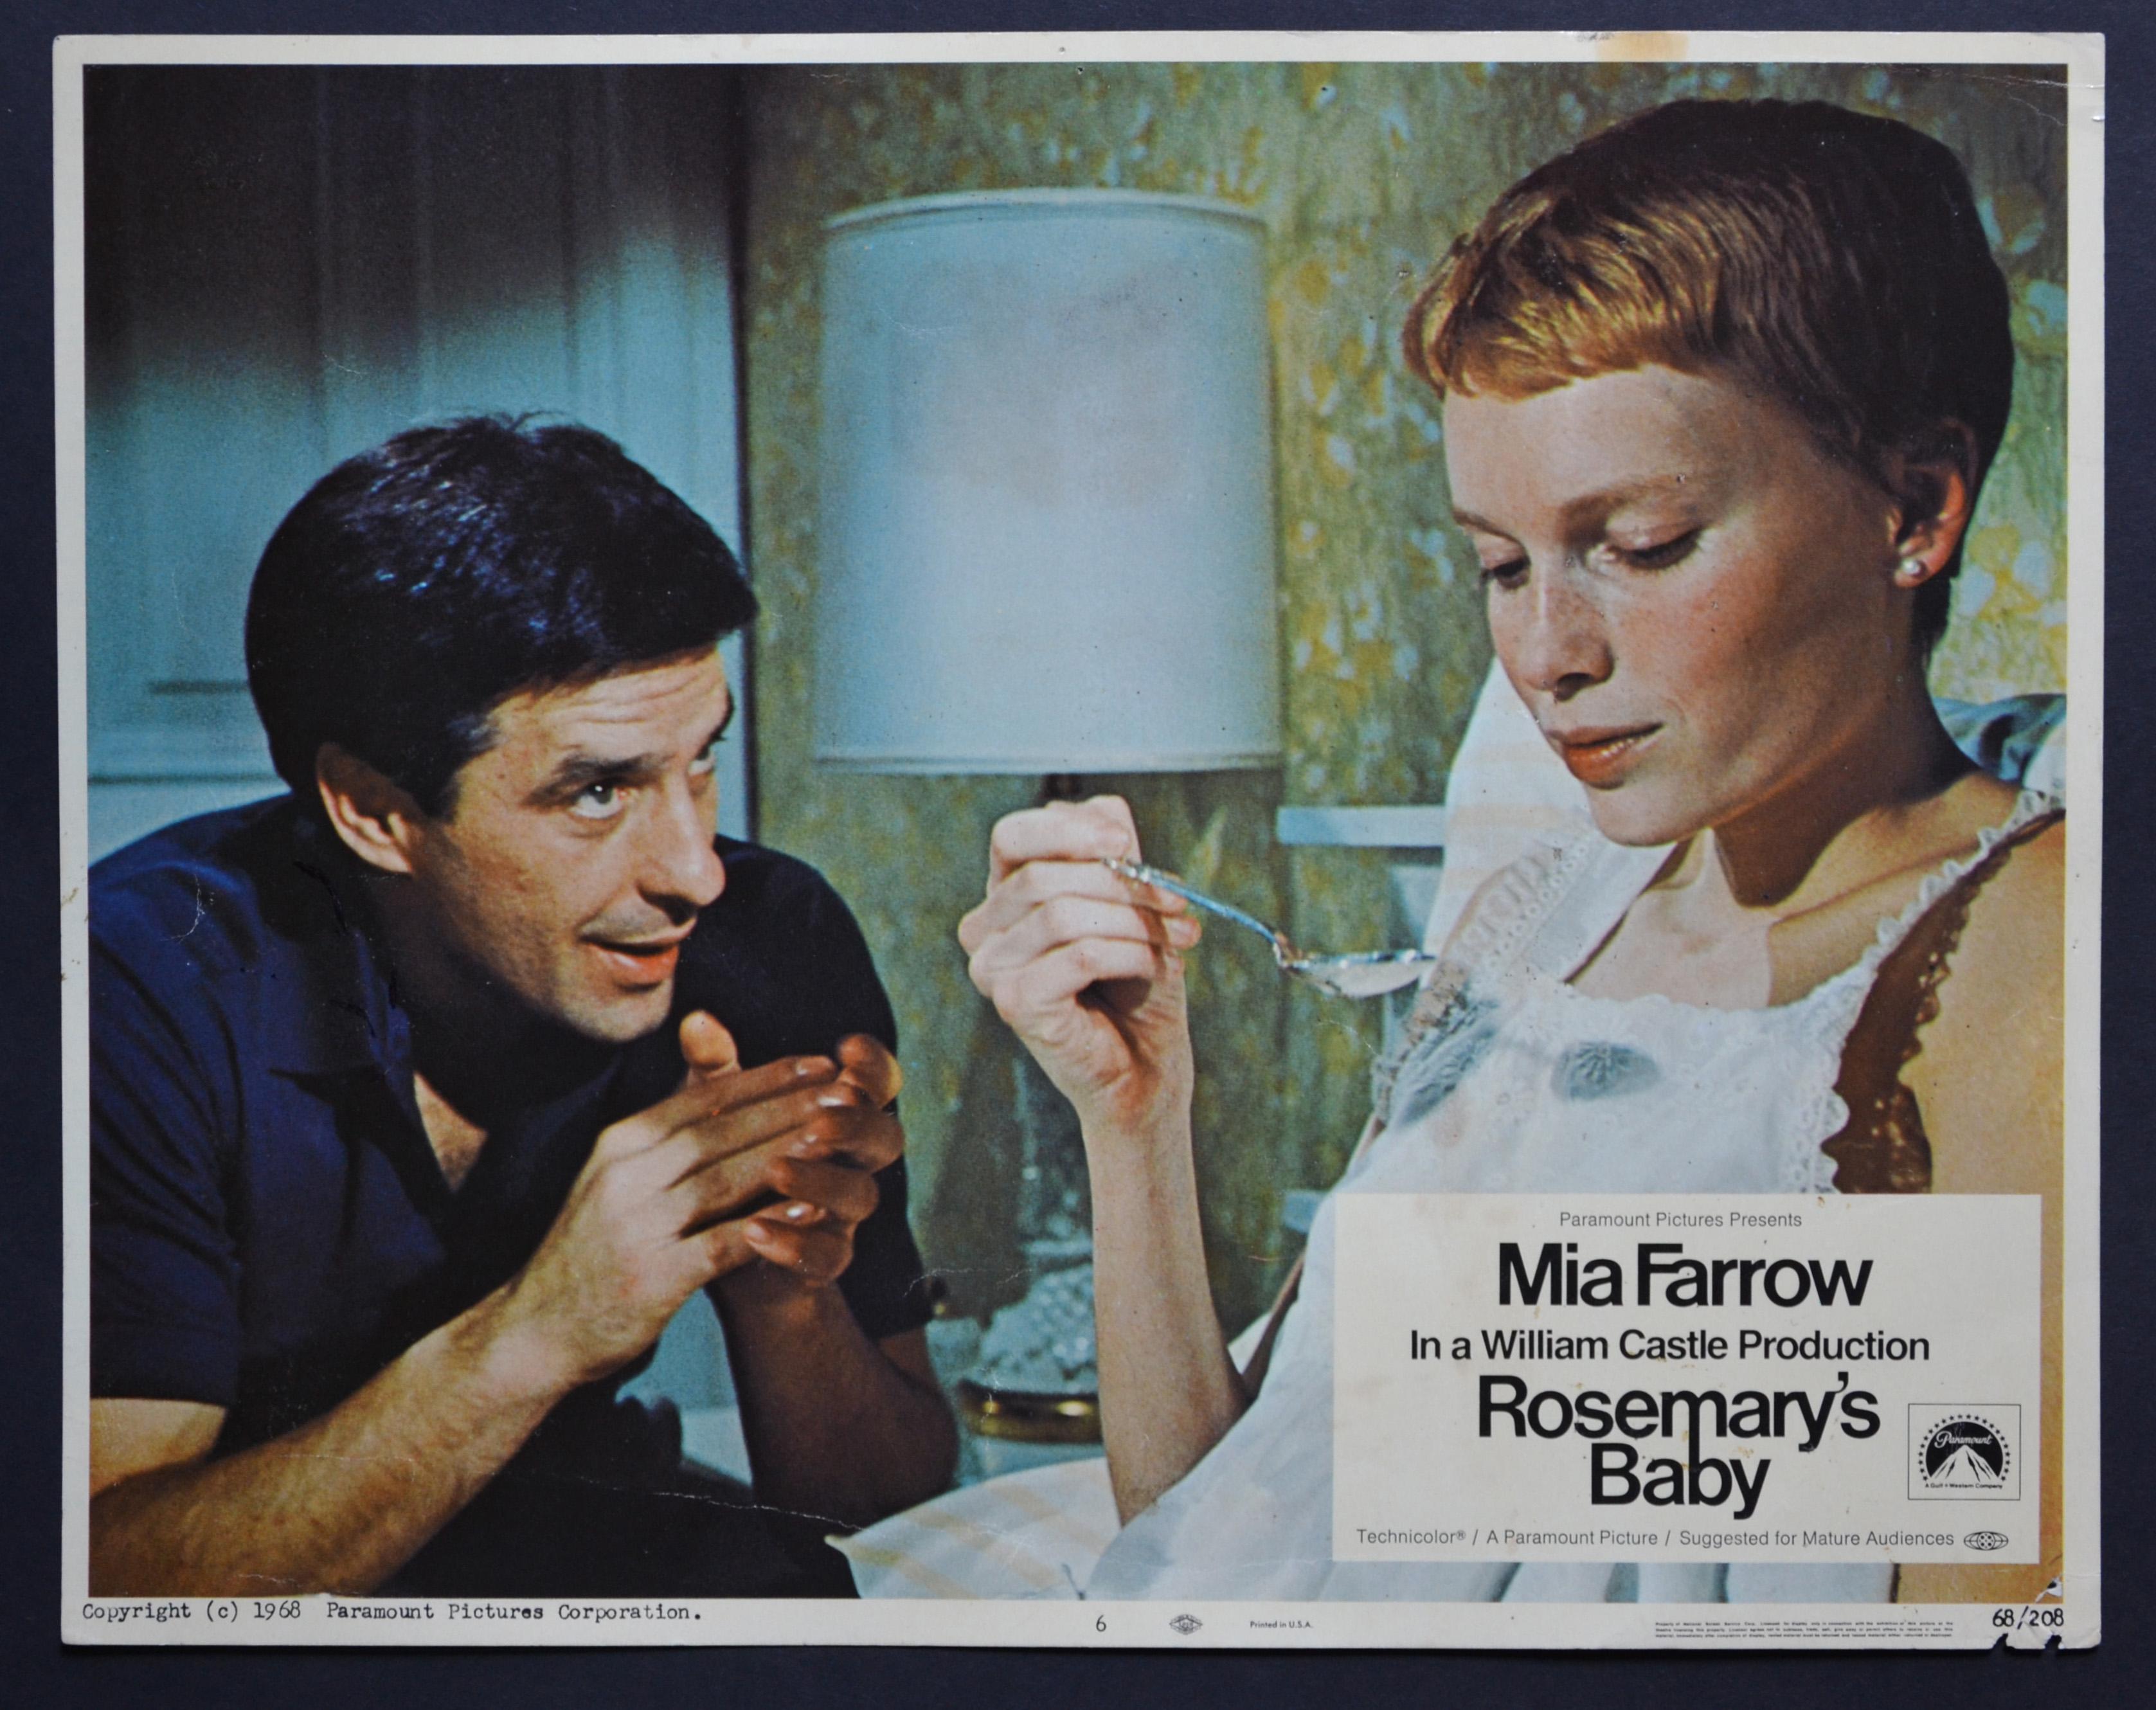 „Rosemary’s Baby“ Vintage American Lobby Card of the Movie, USA 1968.